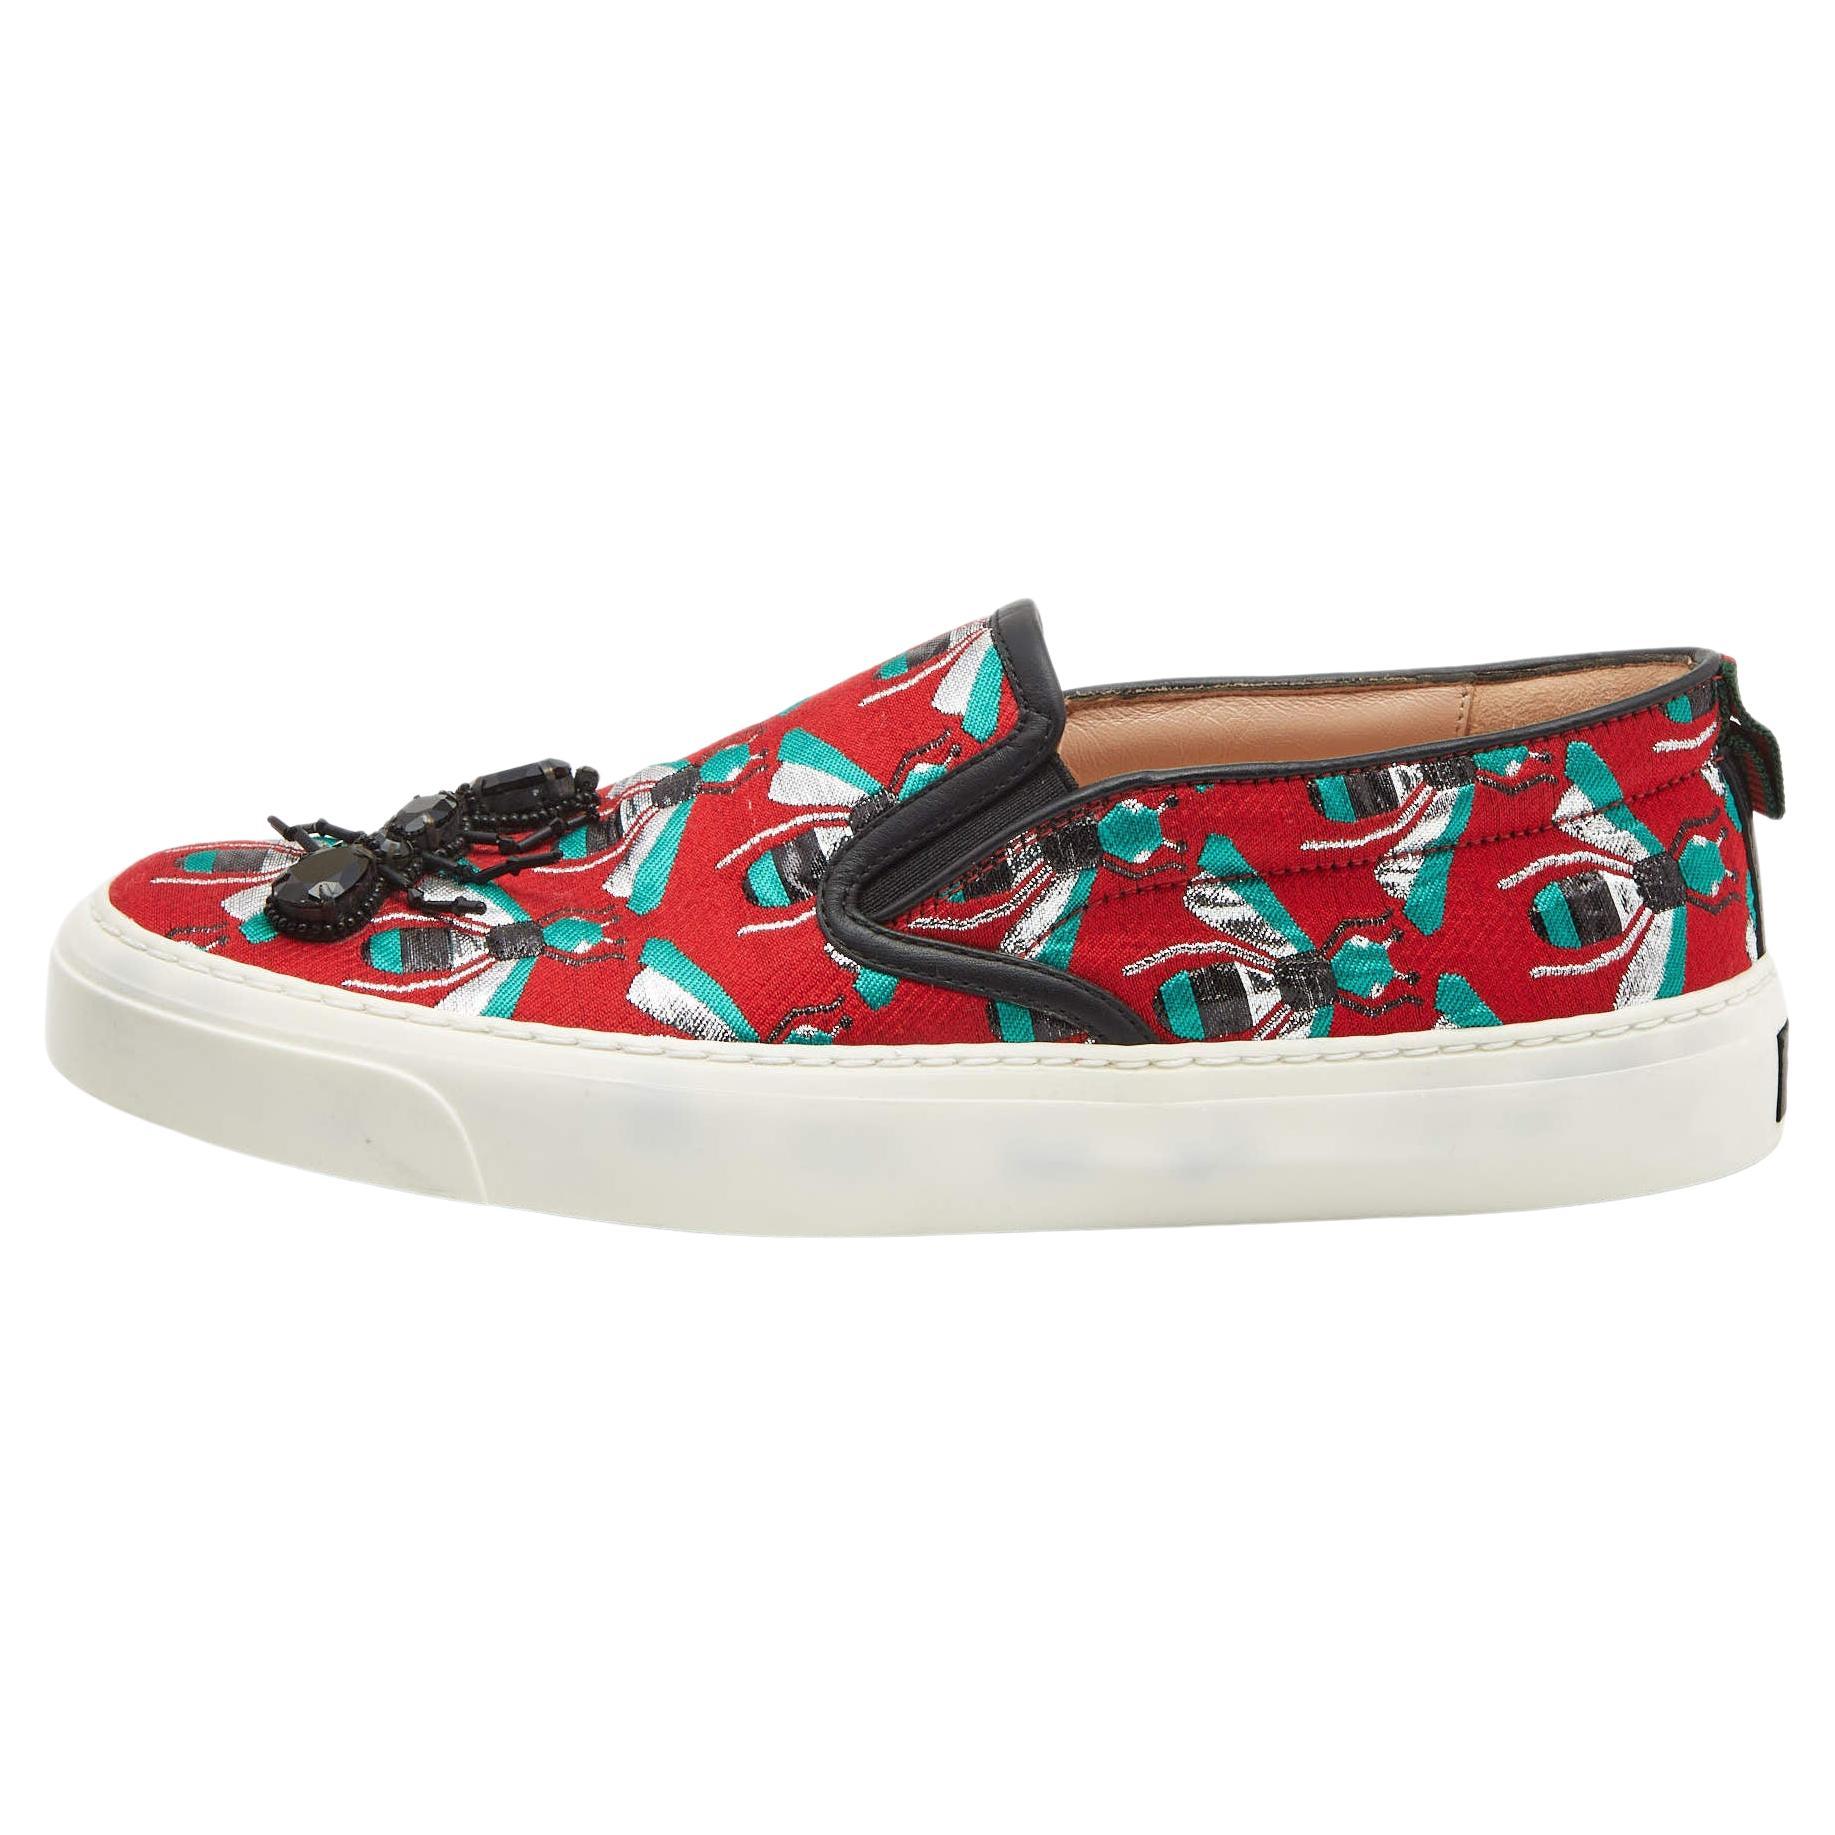 Gucci Red Bee Jacquard Fabric Ant Embellished Slip On Sneakers Size 38 For Sale